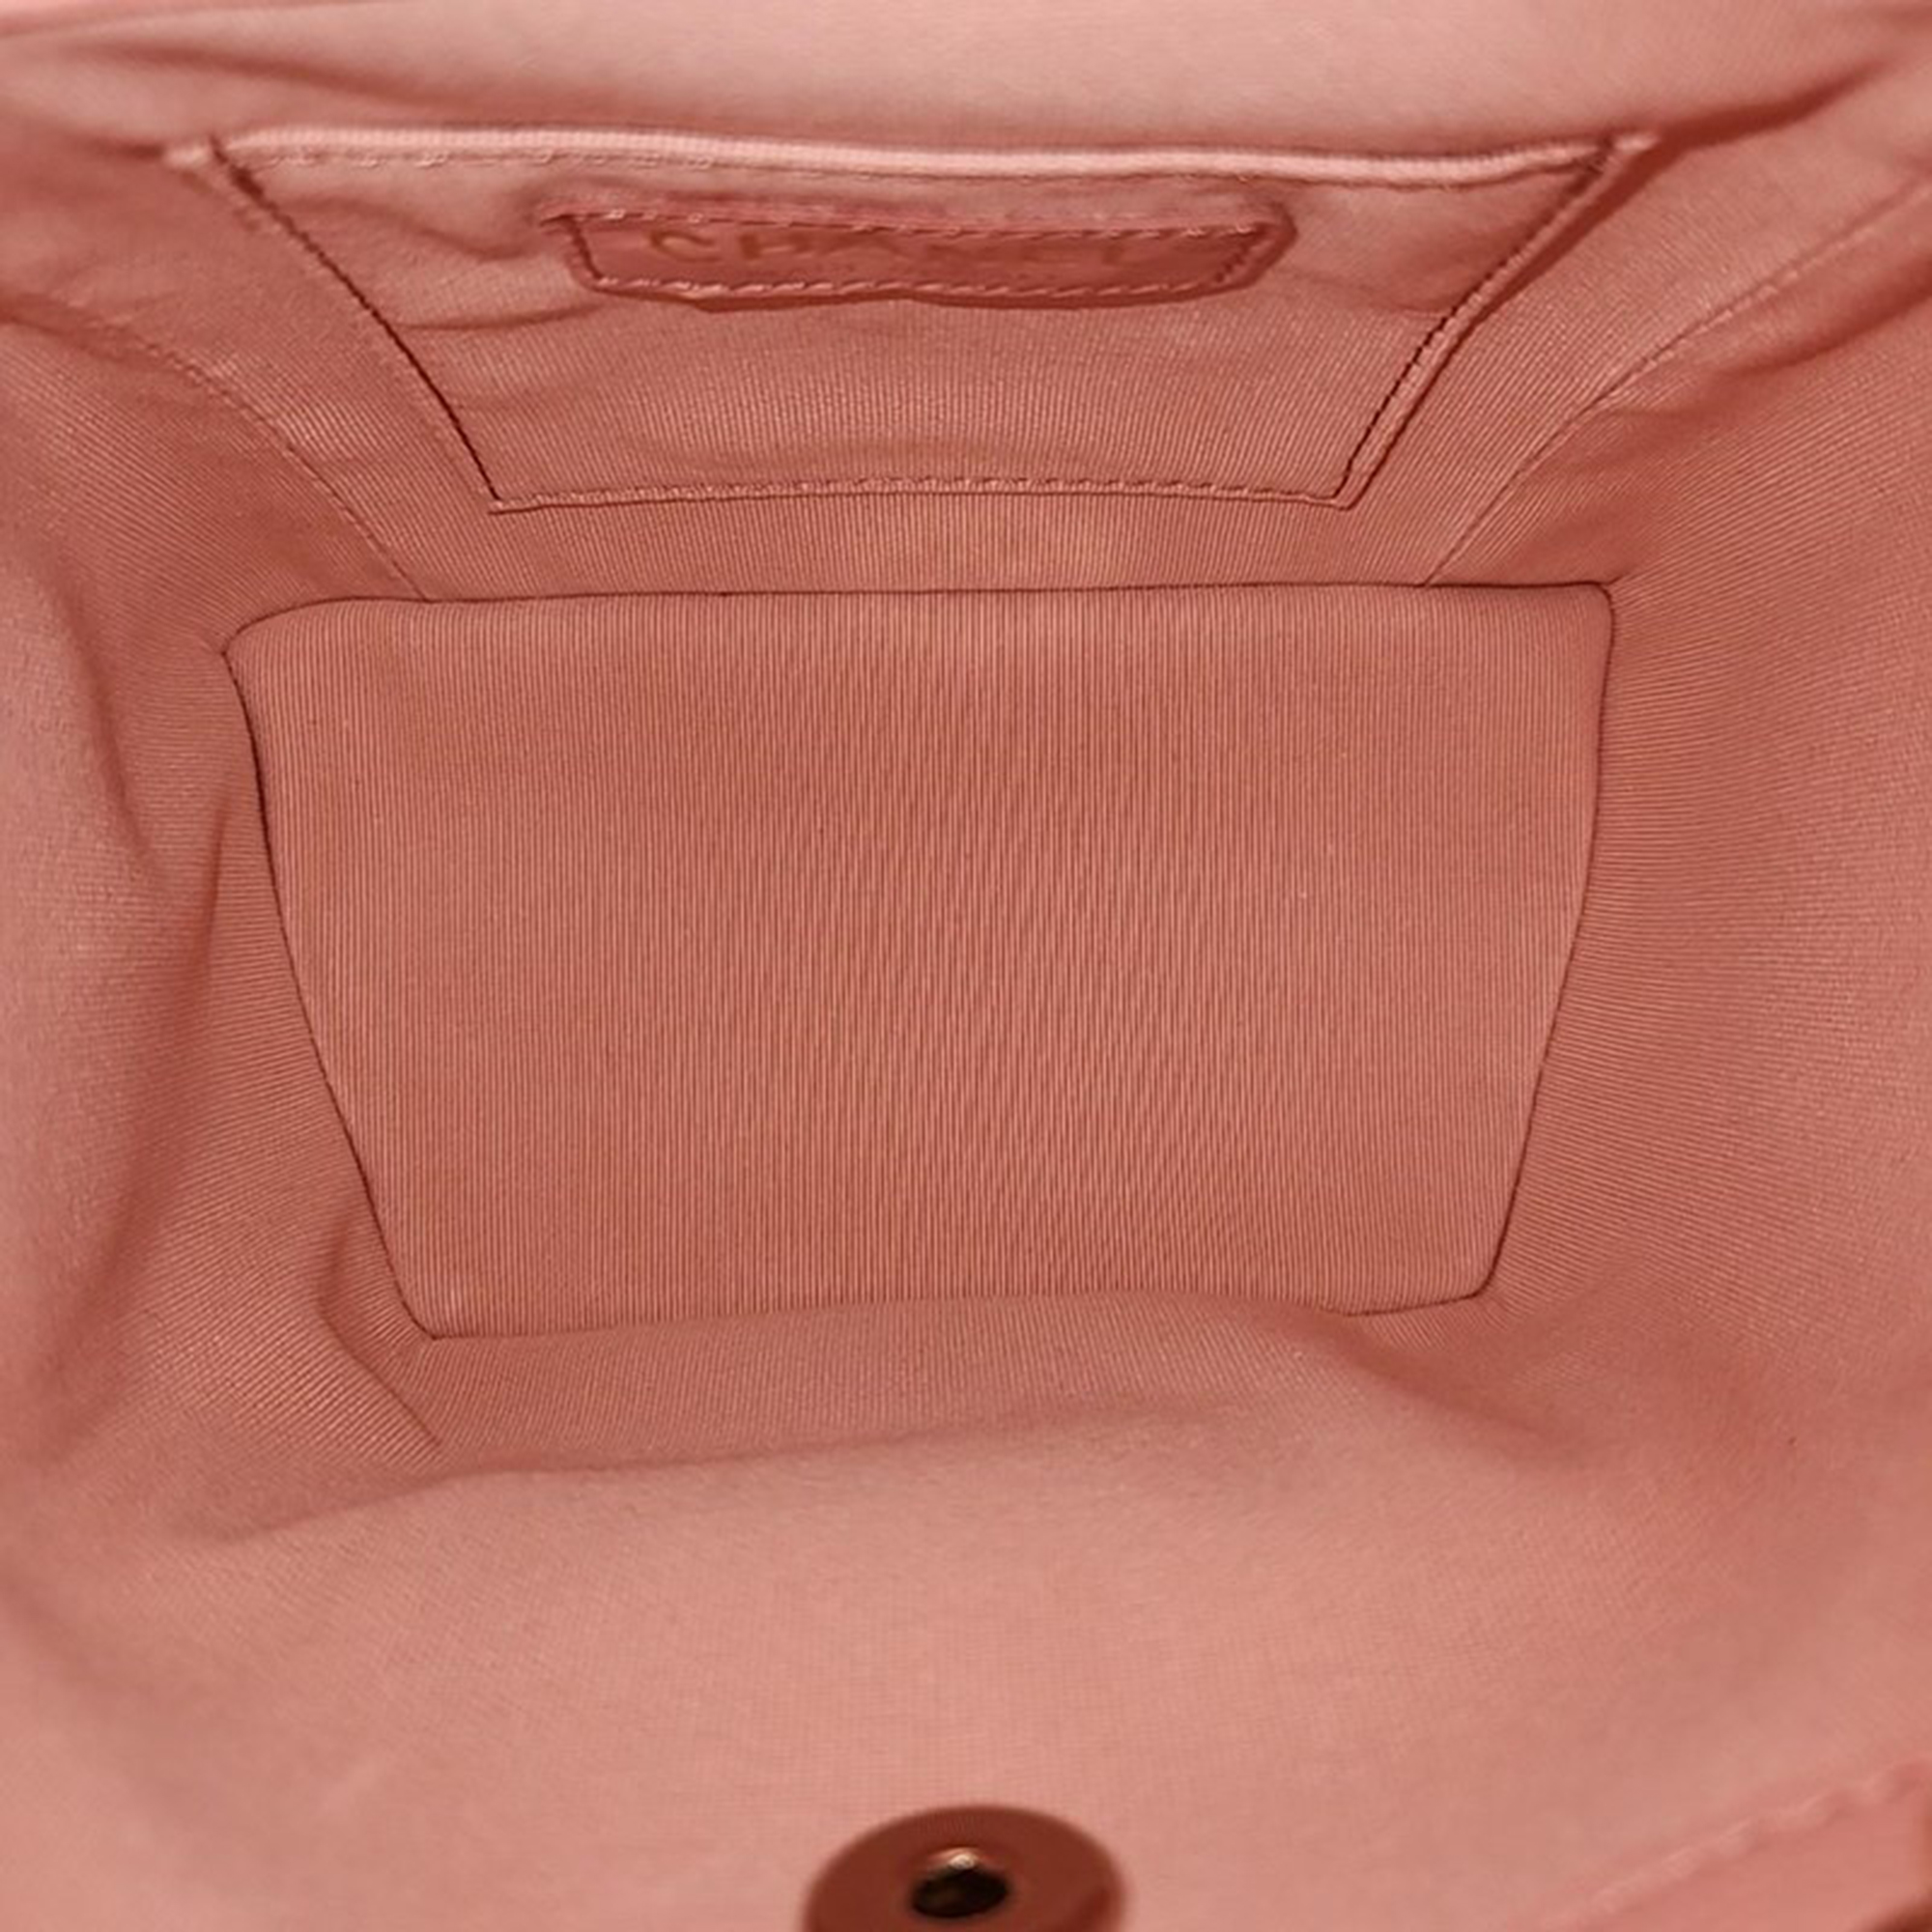 Chanel Caviar Pink Backpack